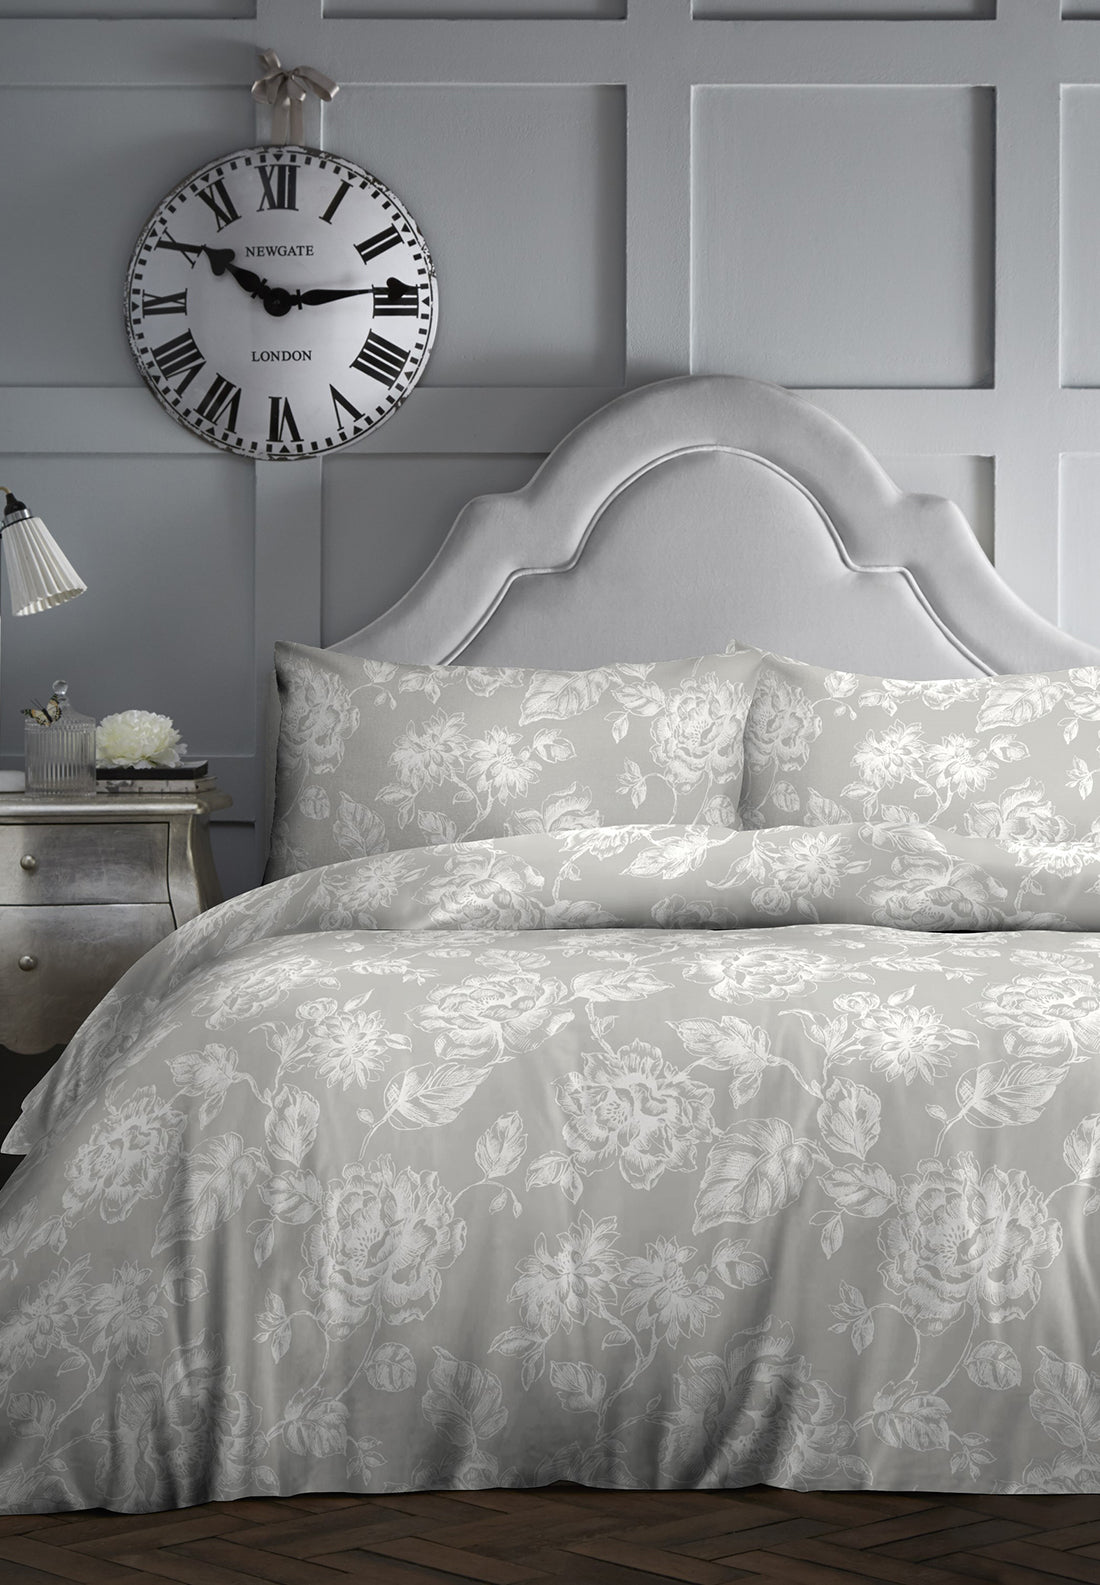 The Home Collection Mimi Duvet Cover Set - Grey 1 Shaws Department Stores